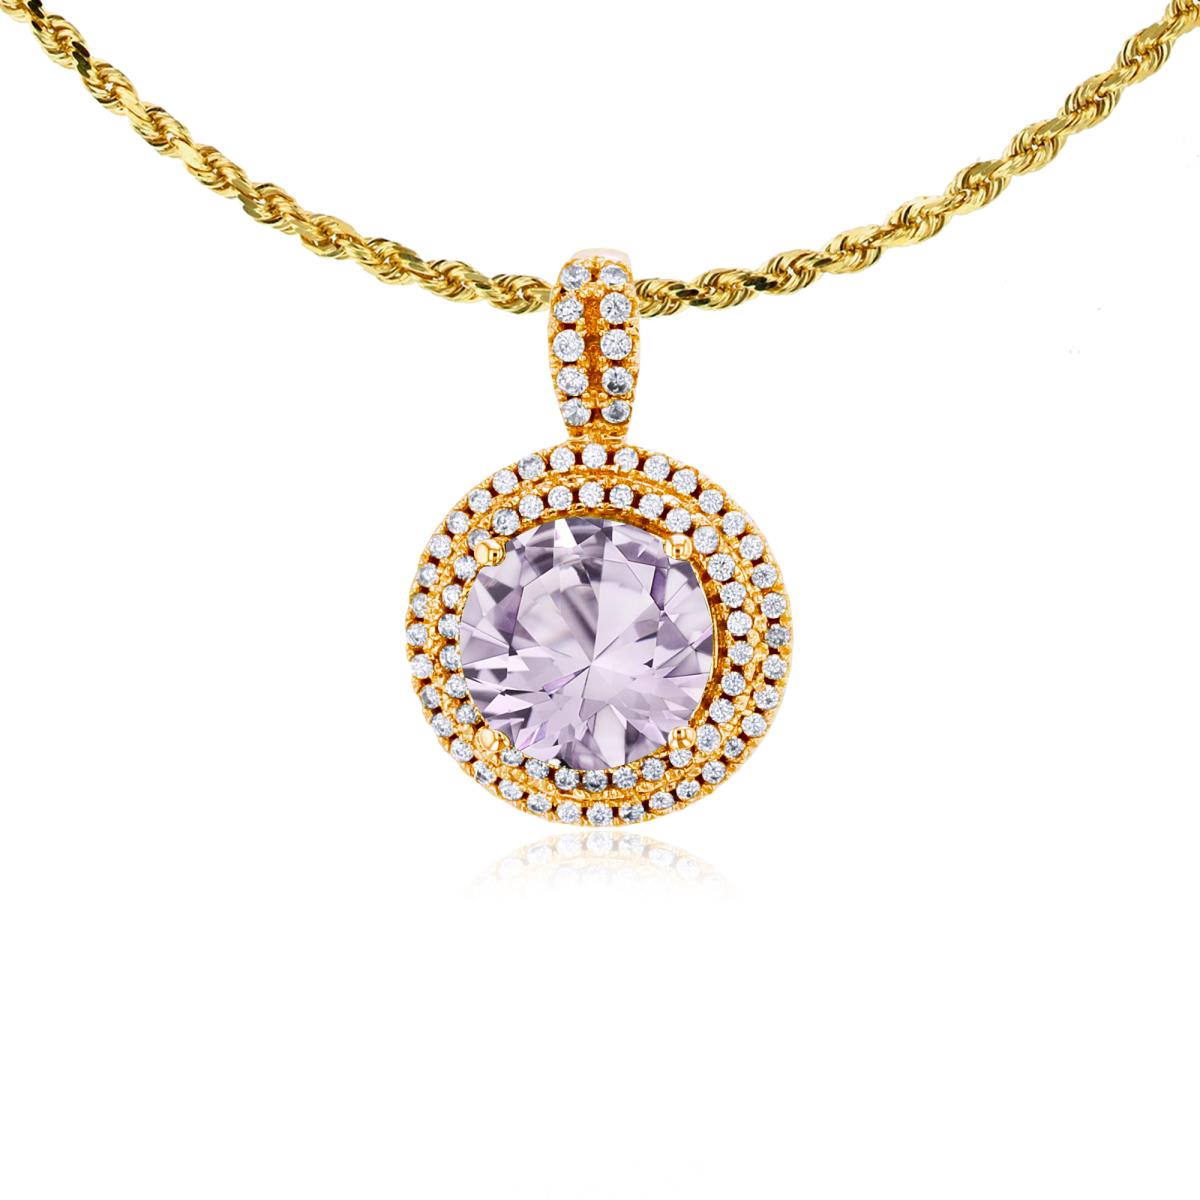 10K Yellow Gold 7mm Round Rose De France & 0.25 CTTW Diamonds Double Halo 18" Rope Chain Necklace